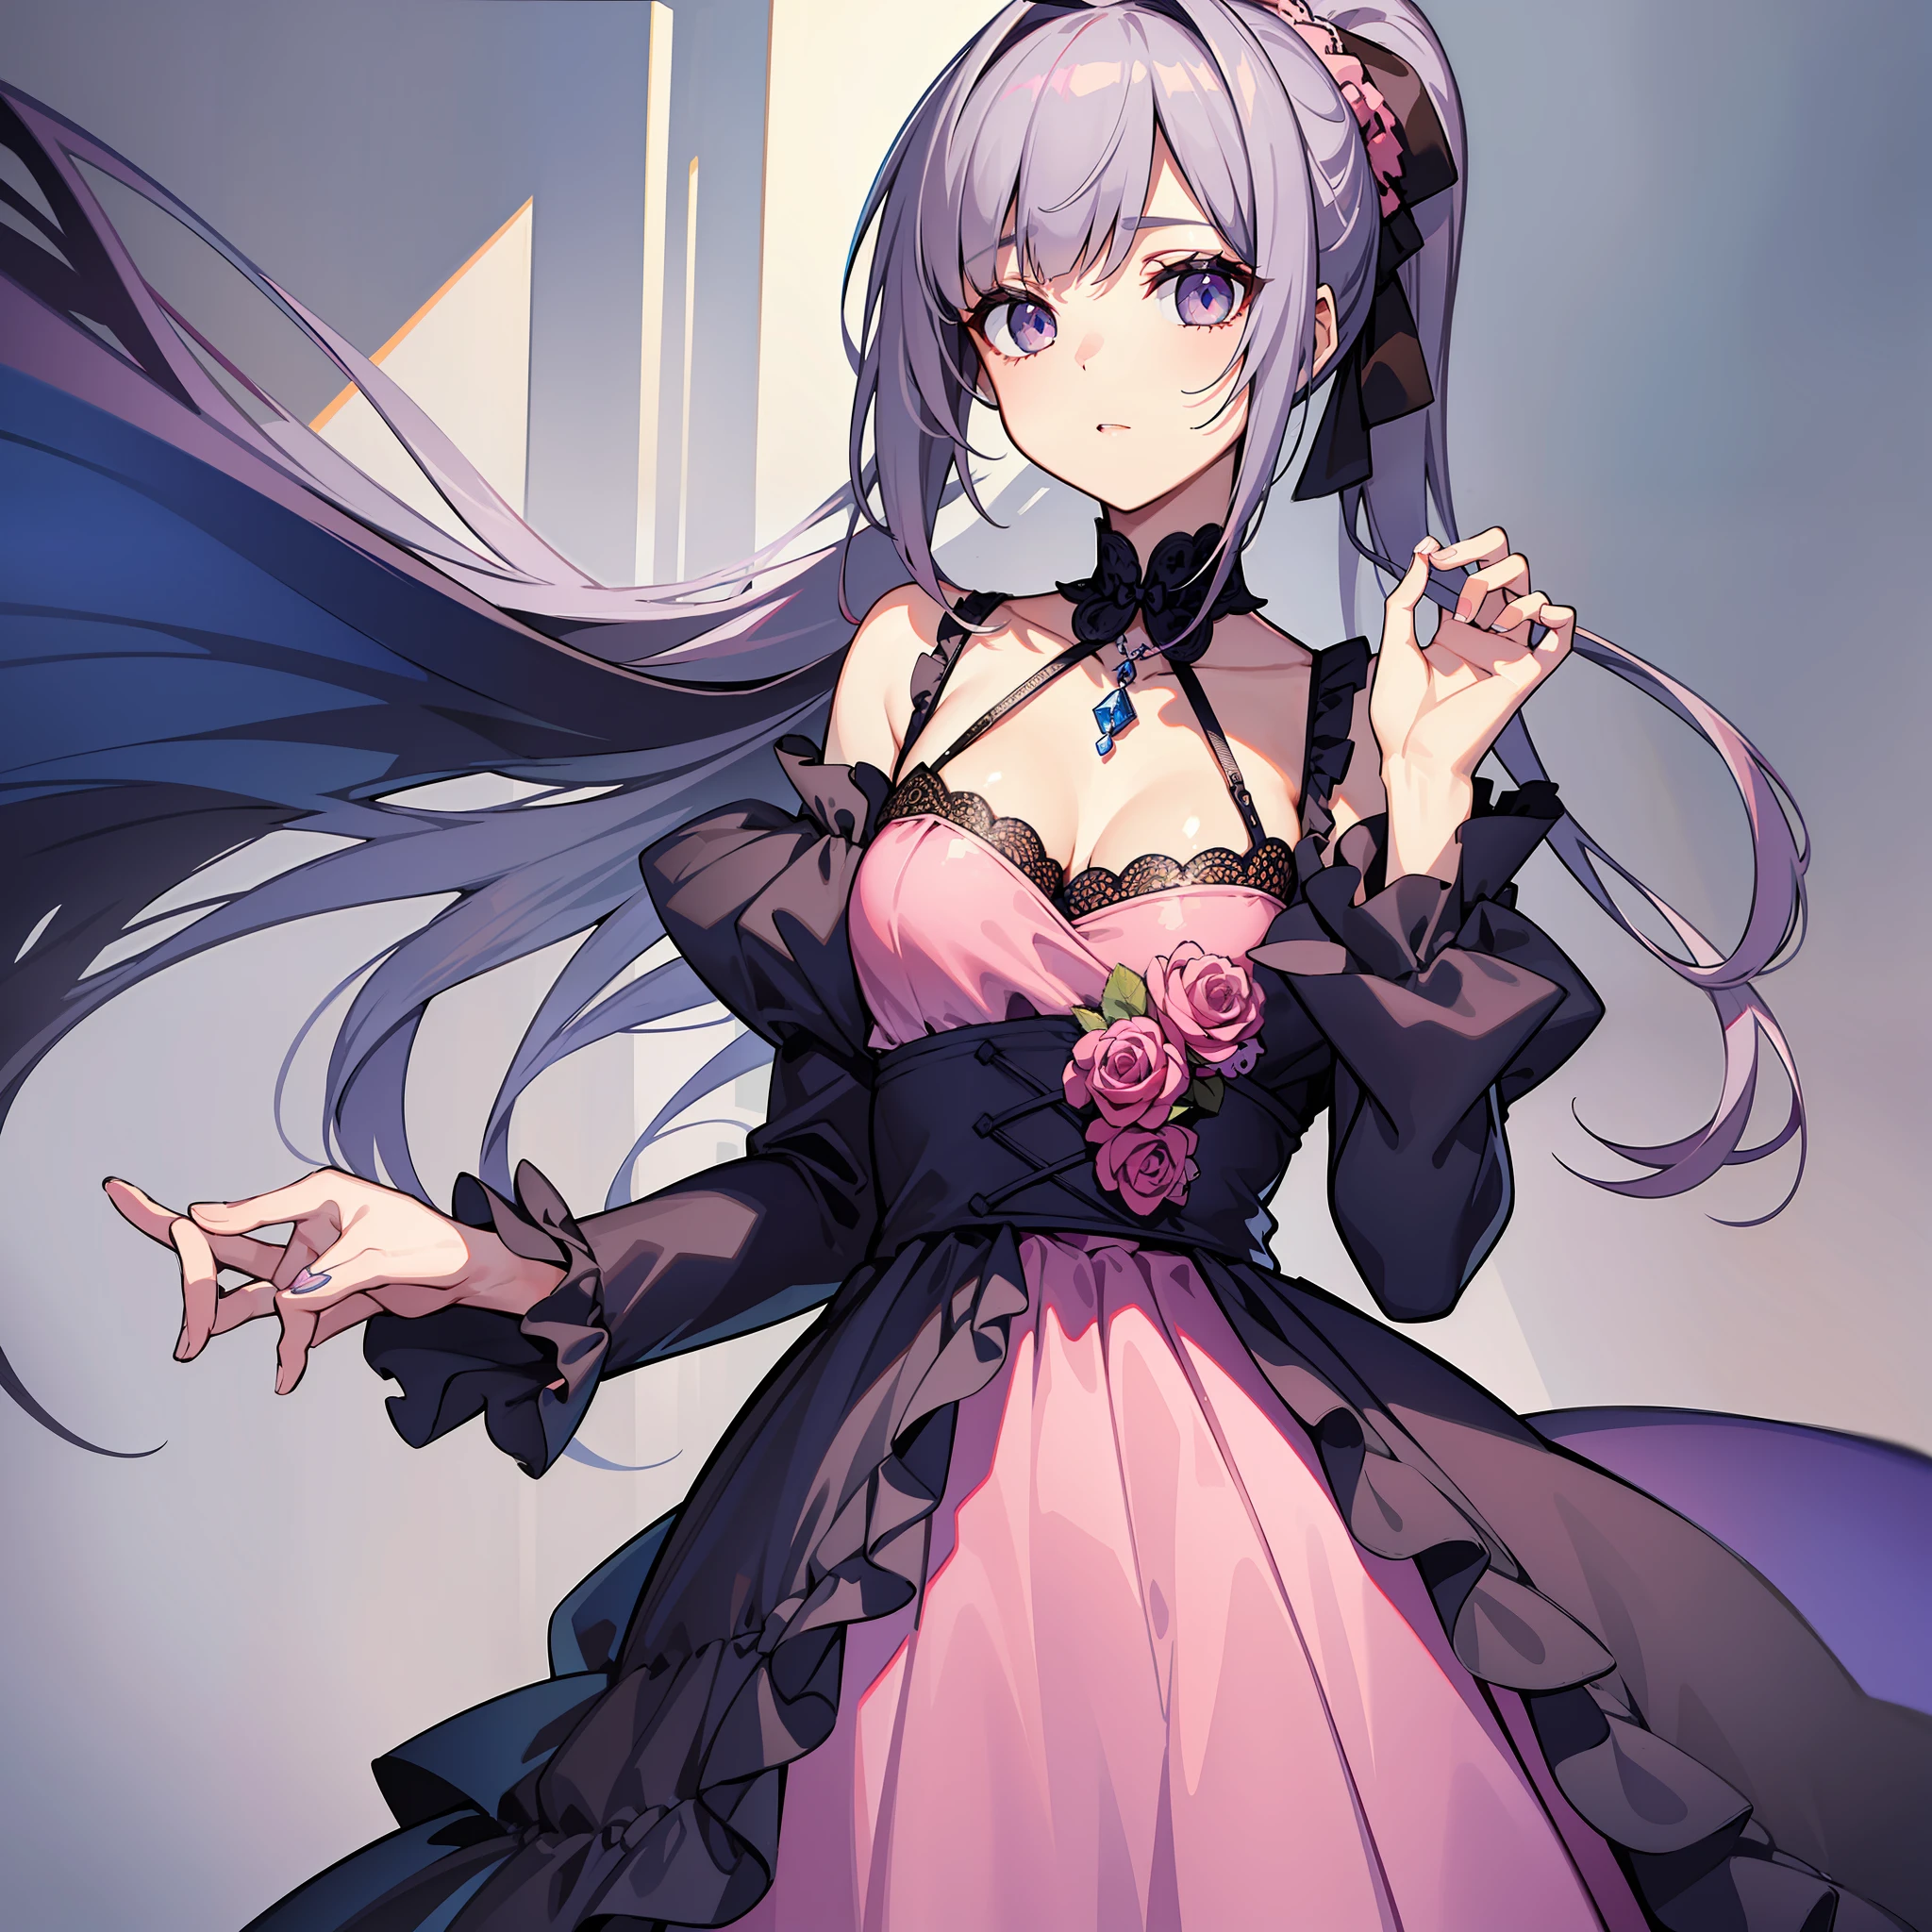 "Create a masterpiece with high-resolution and the best quality, emphasizing intricate eye details and elaborate hair details. The subject is a single, elegant Lolita pink dress, indigo hair, ponytail, gray eyes